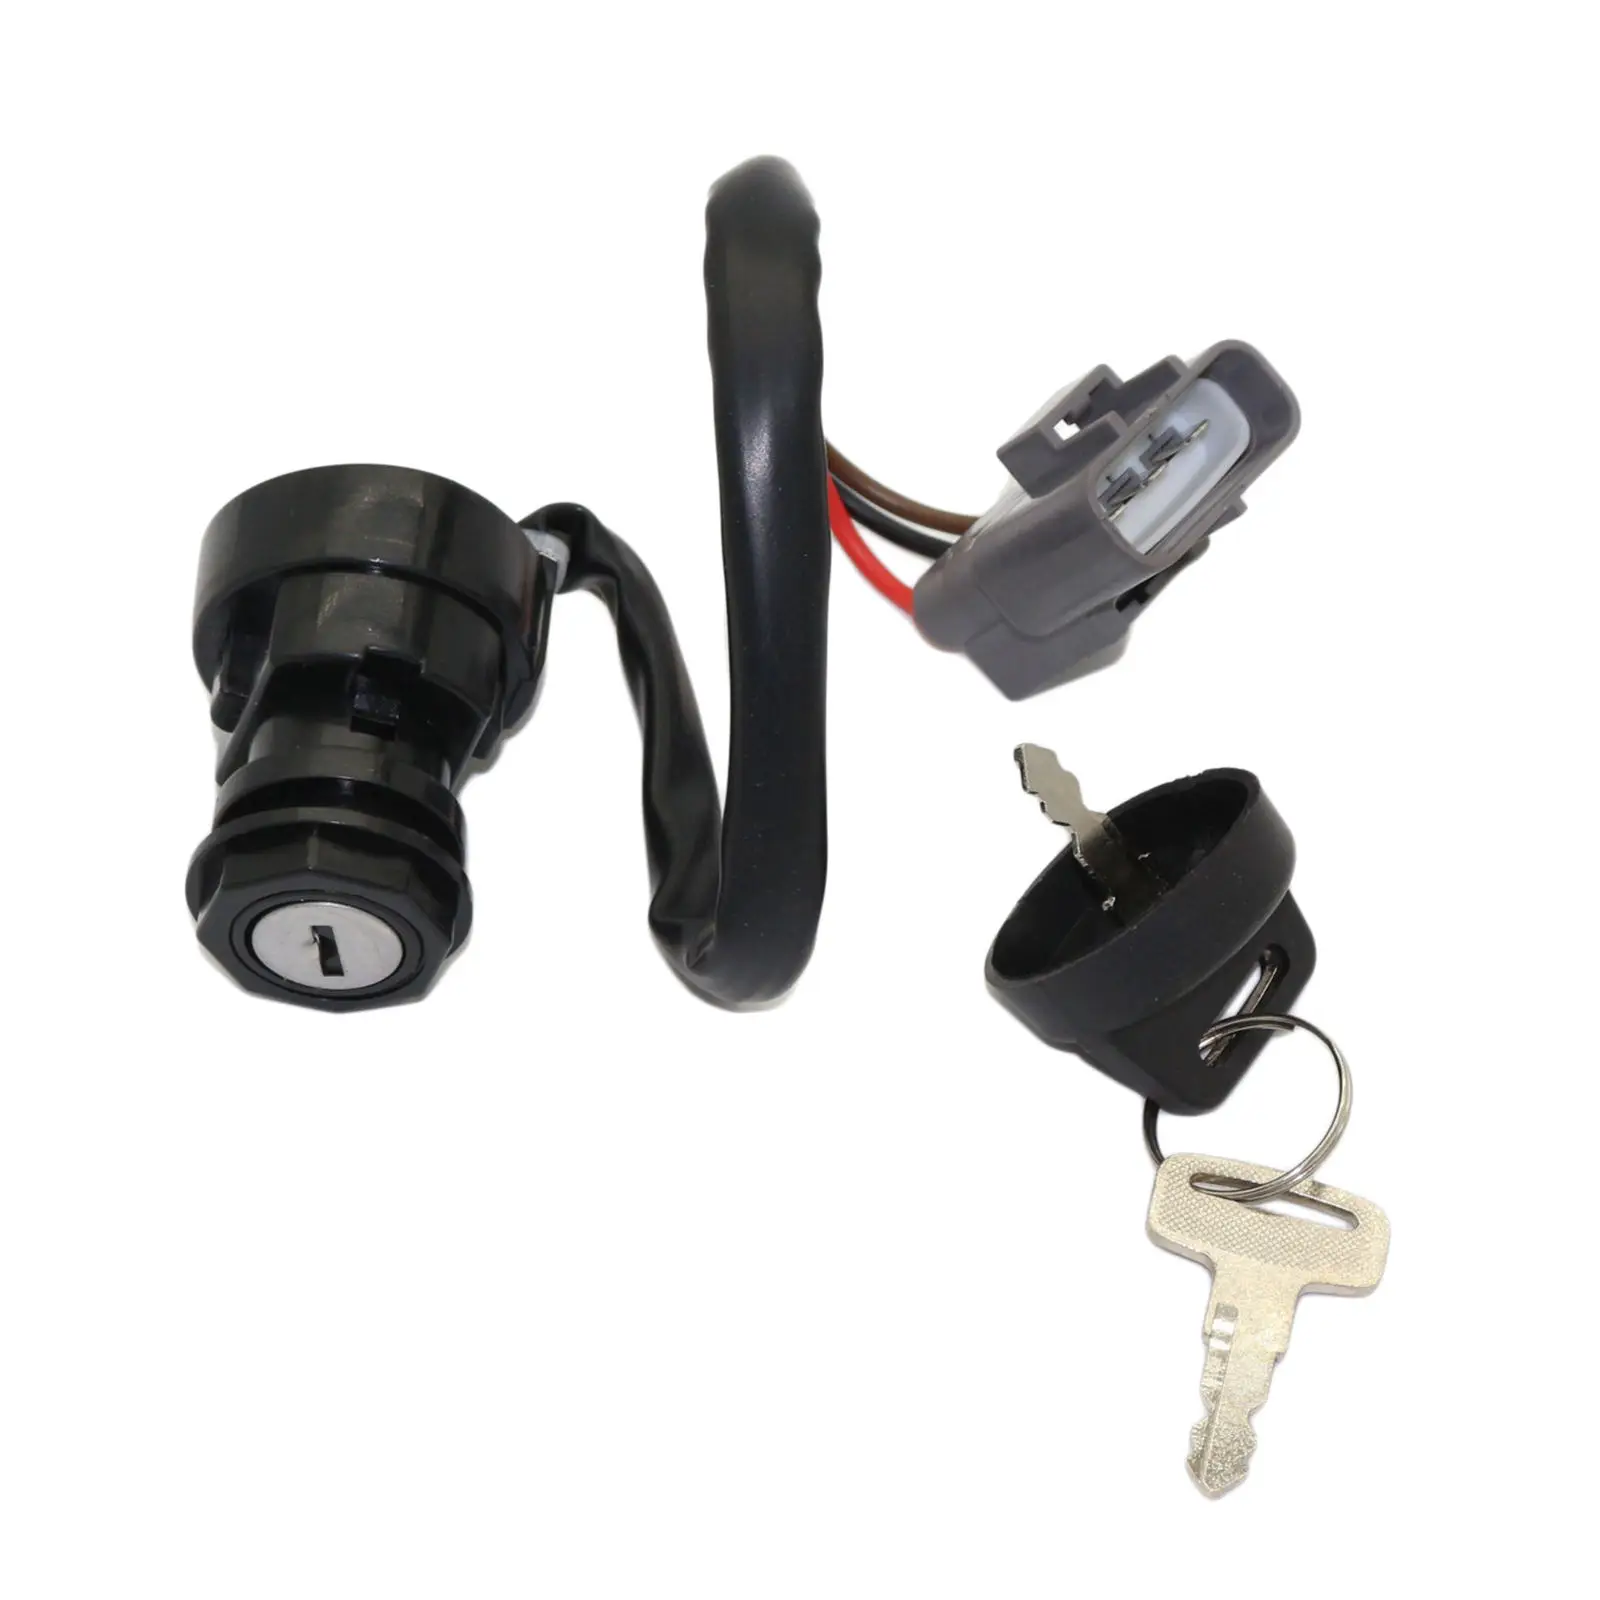 Ignition Key Switch Replacements Fits for Yamaha  660 YFM660 2002 2003 04 05 06 07 08 ATV